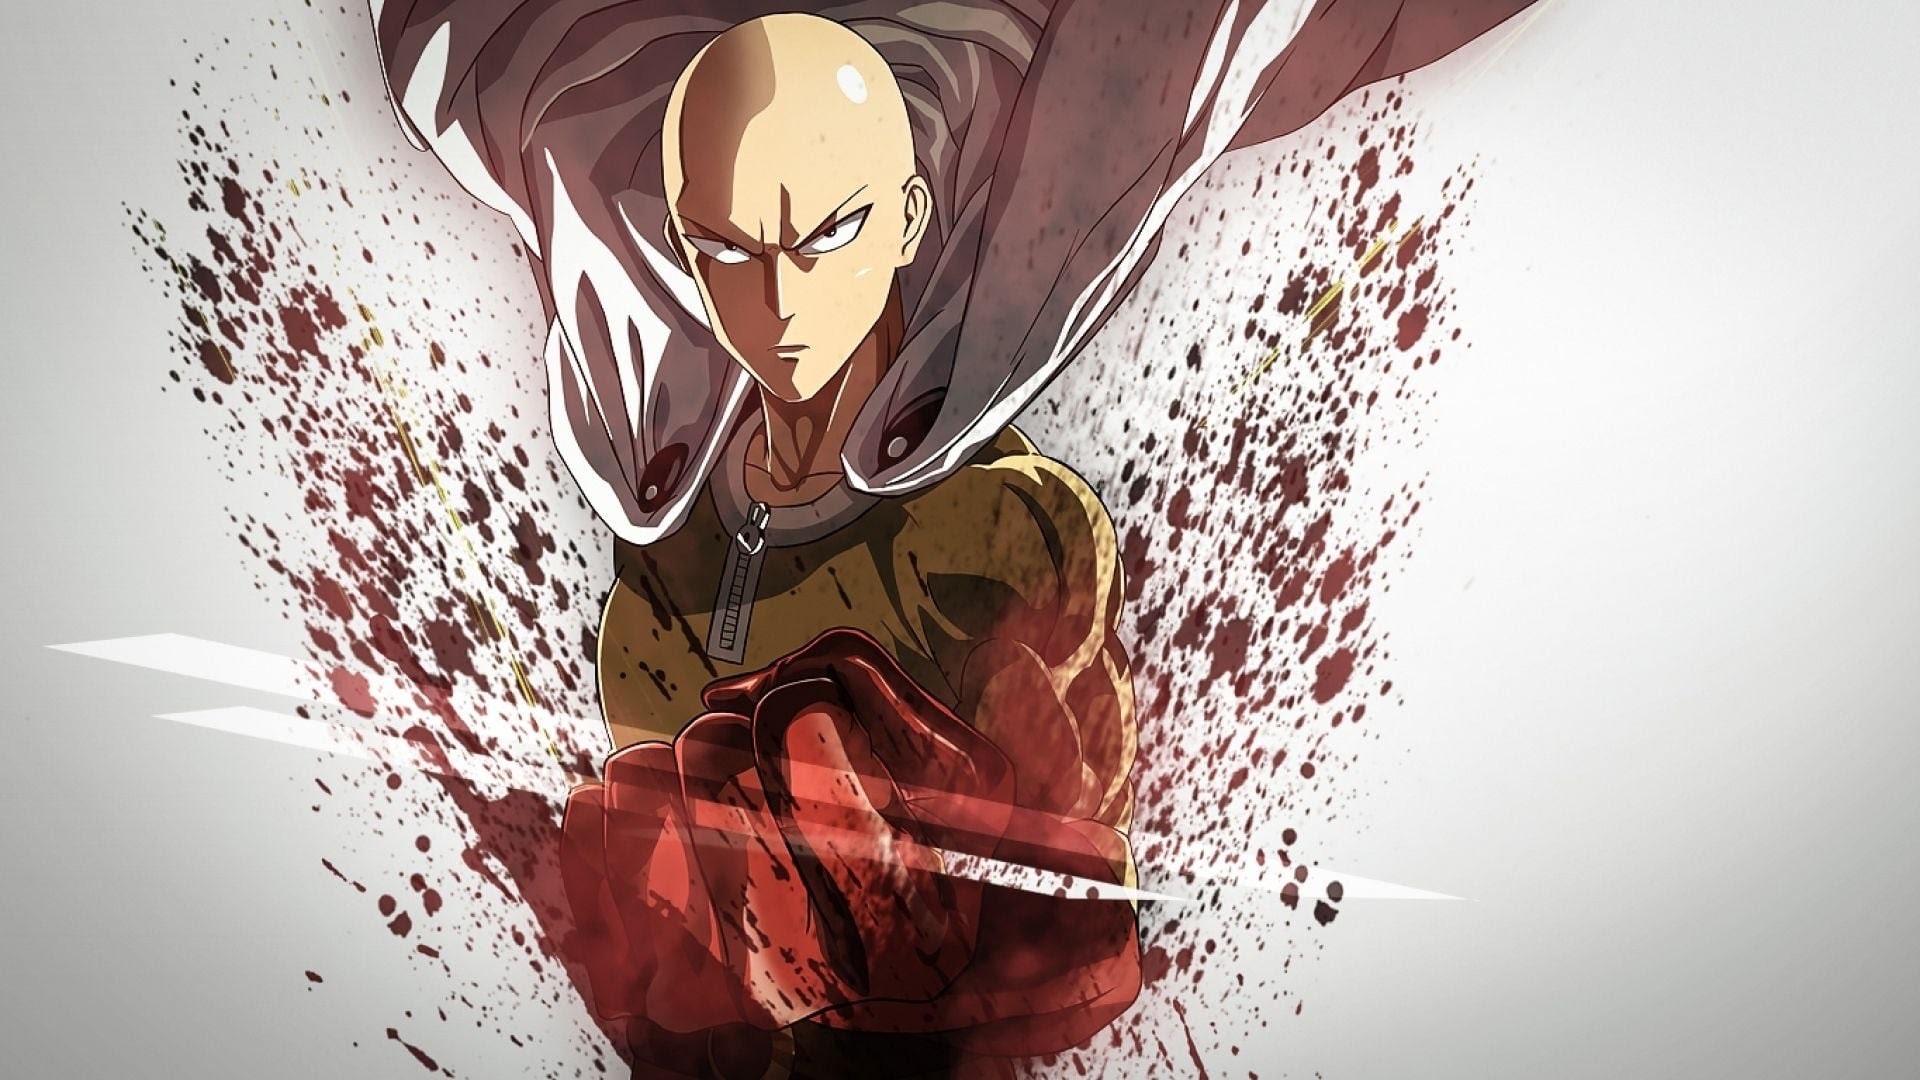 1920x1080 One Punch Man One punch wallpaper group hd wallpapers